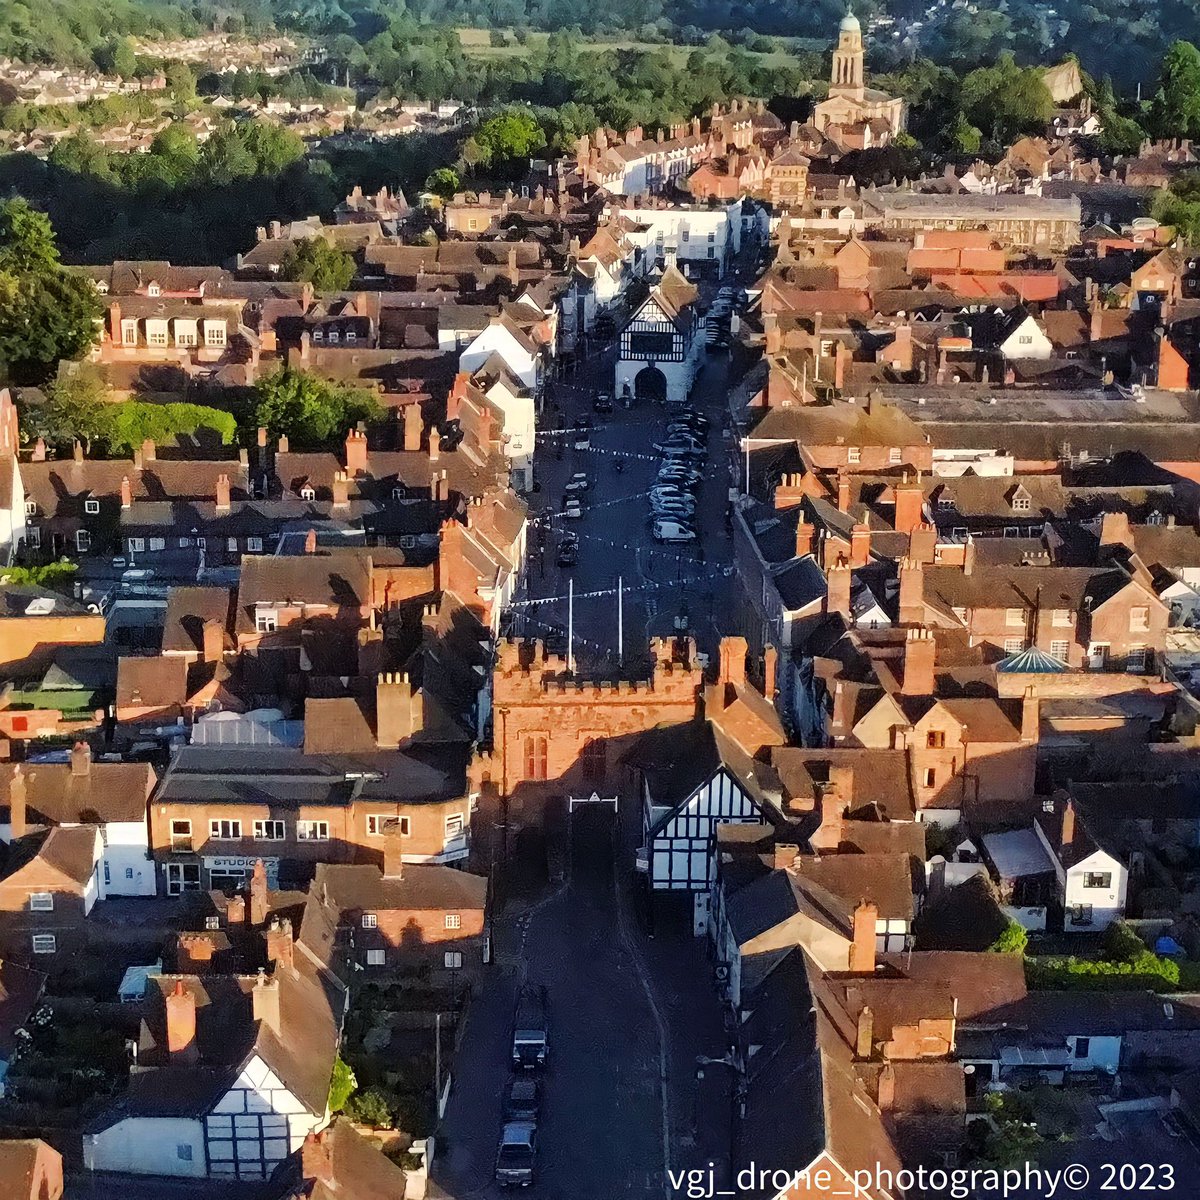 Bridgnorth High St gearing up for another sunny day #drone #dronephotography #dji #photography #photooftheday #aerialphotography #bridgnorth #lovebridgnorth #SHROPSHIRE #highstreet #summerdays #capturingbritain